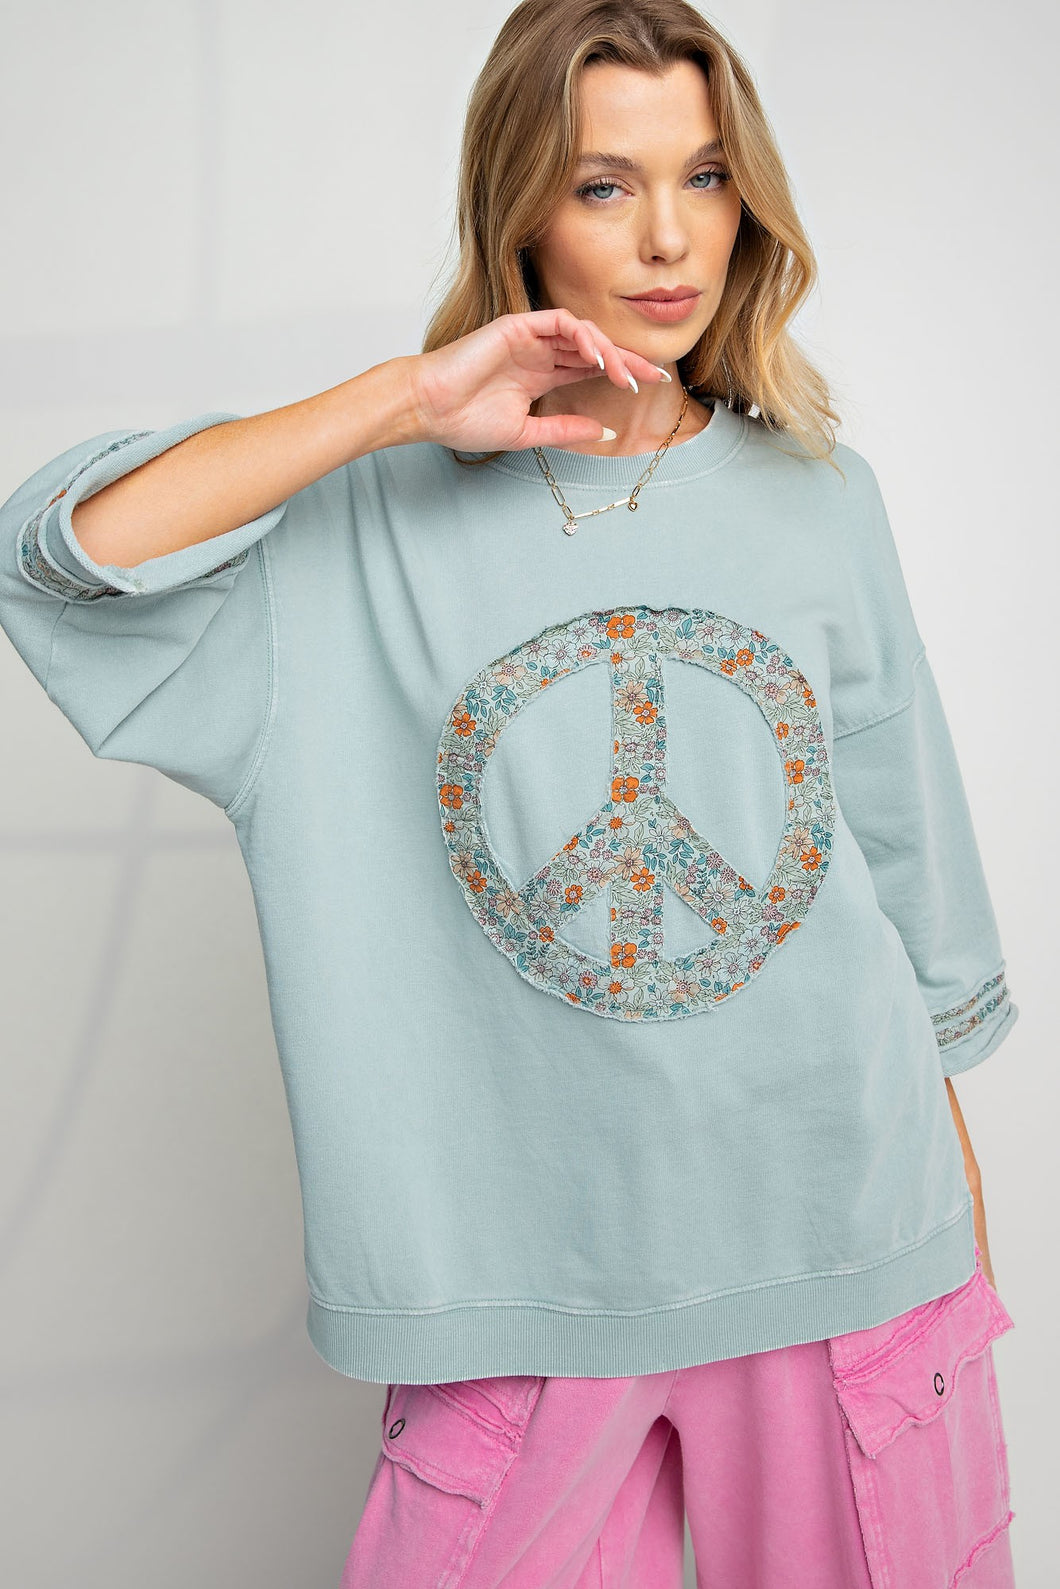 Easel Floral Peace Sign Pullover in Faded Blue Shirts & Tops Easel   